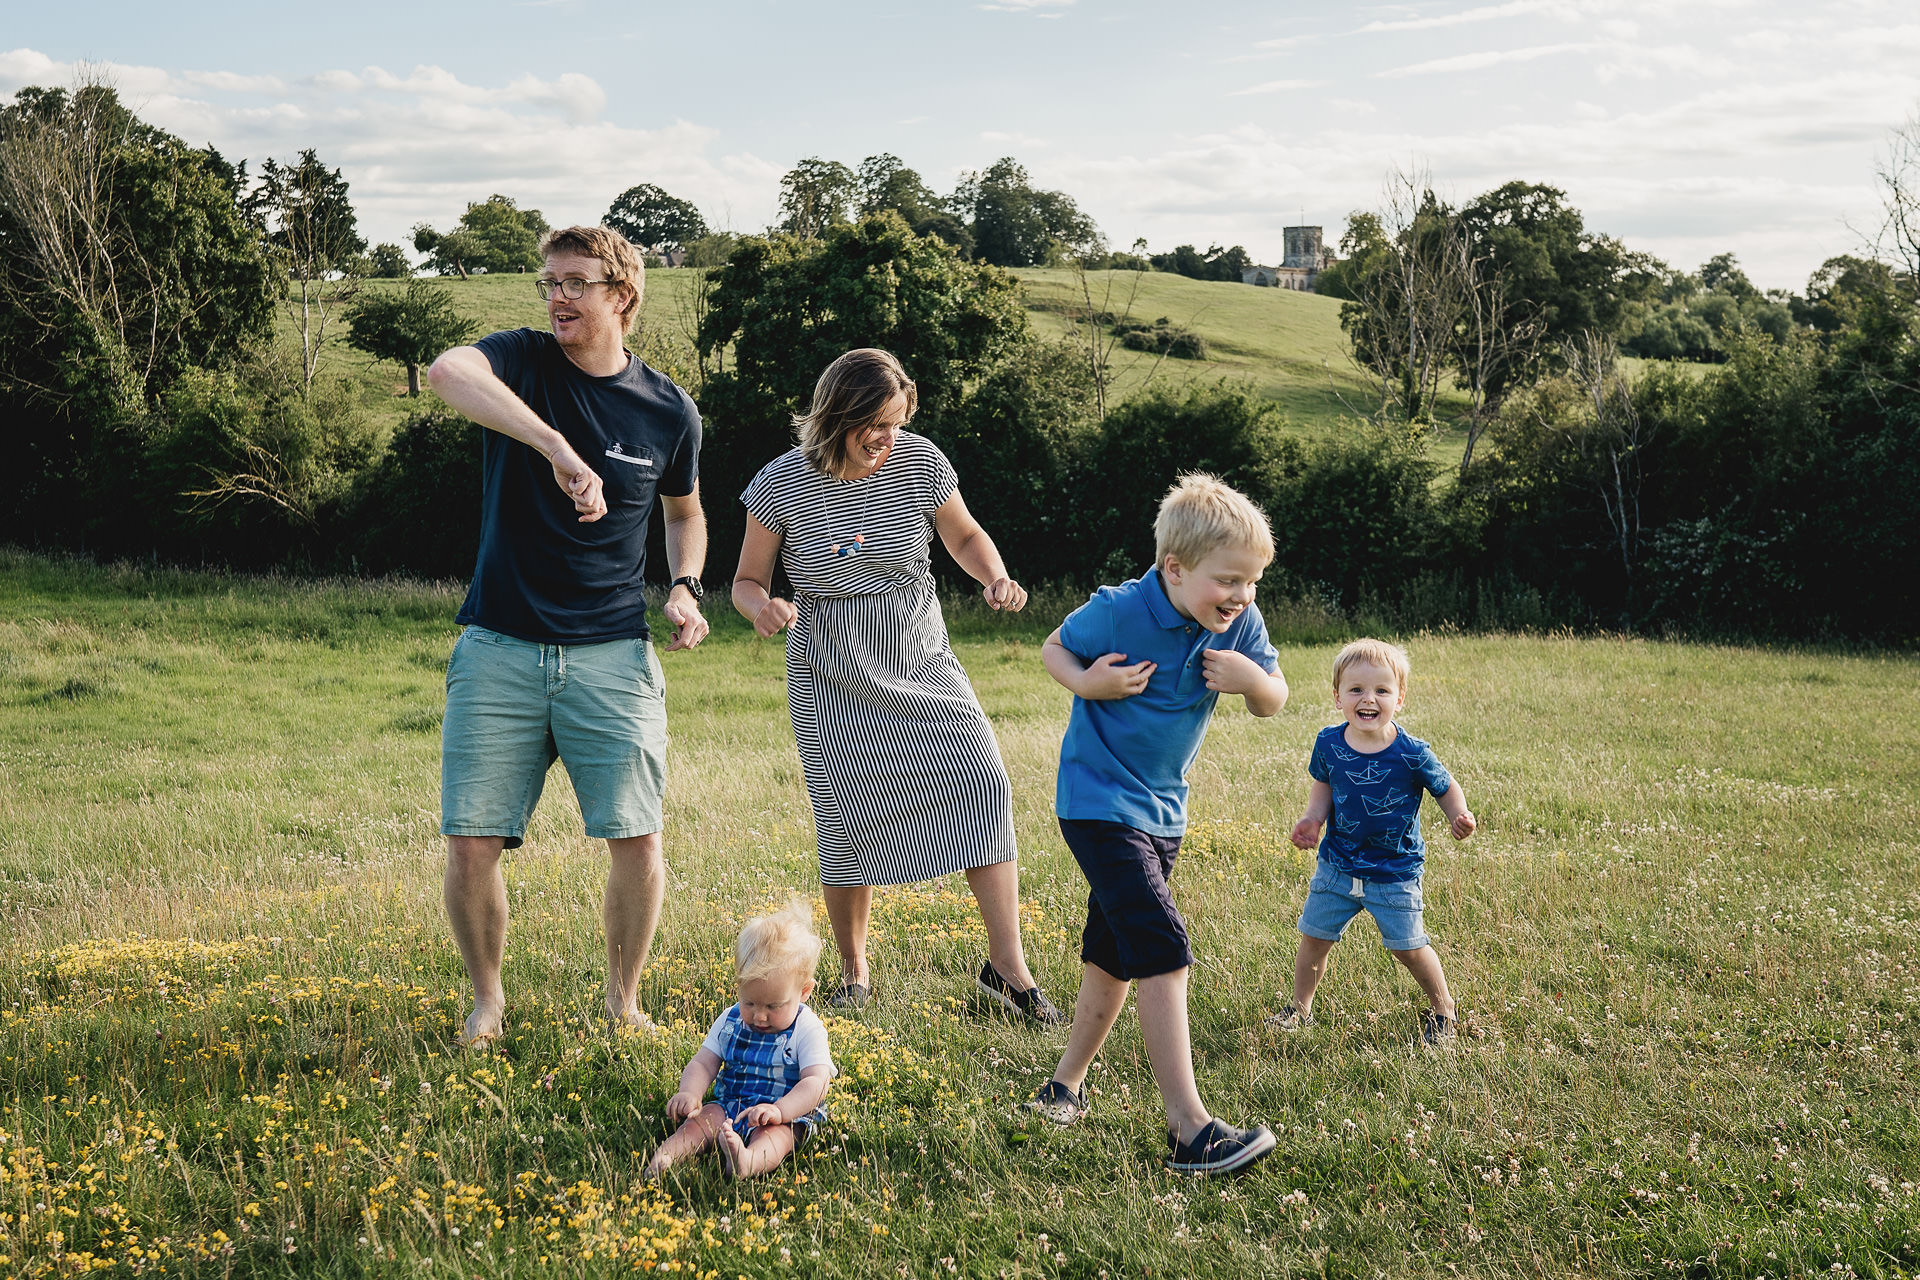 A family dancing together in a field